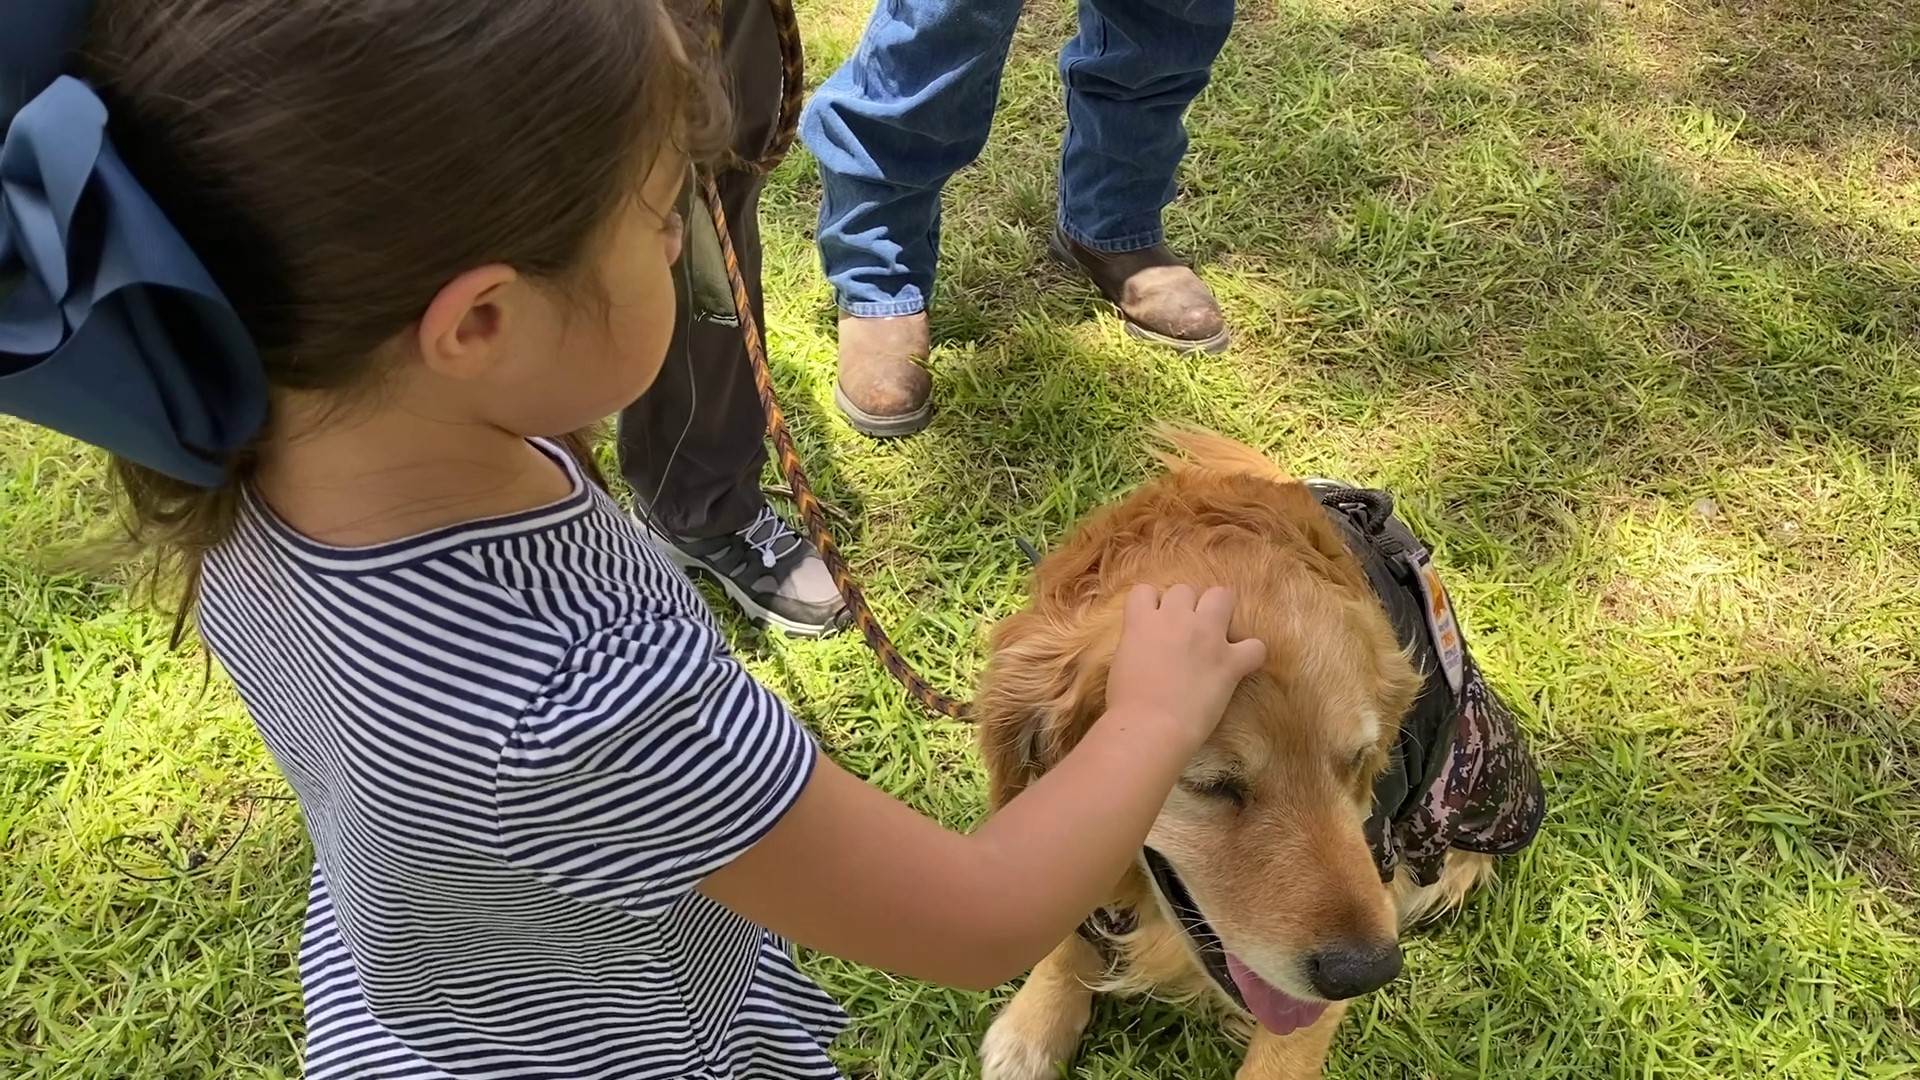 Several volunteer groups are in Uvalde right now. Some brought therapy dogs, while others brought trained crisis dogs.